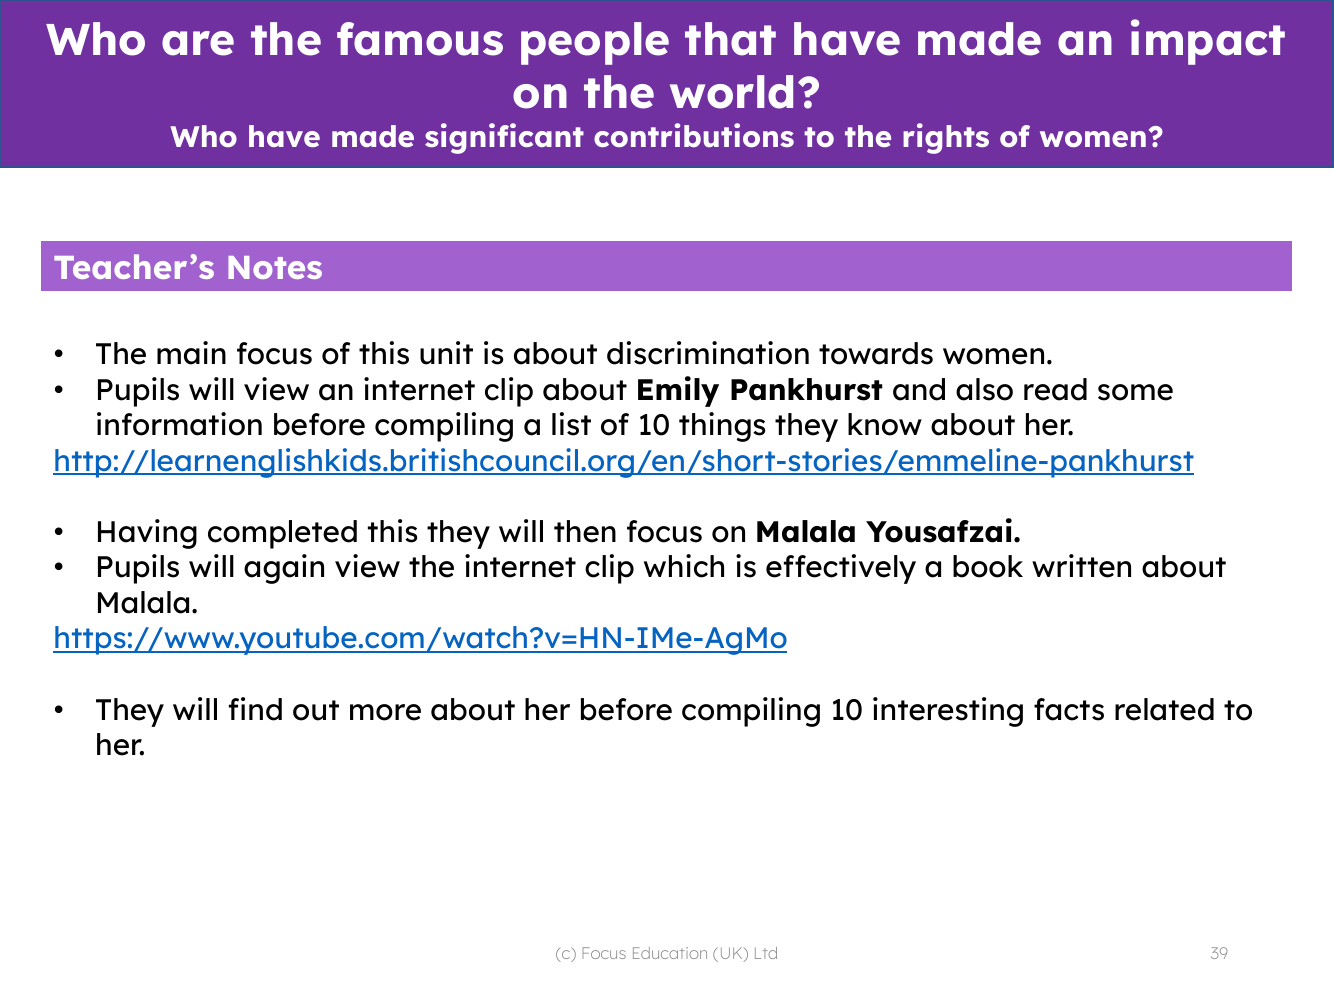 Who have made significant contributions to the rights of women? - Teacher notes